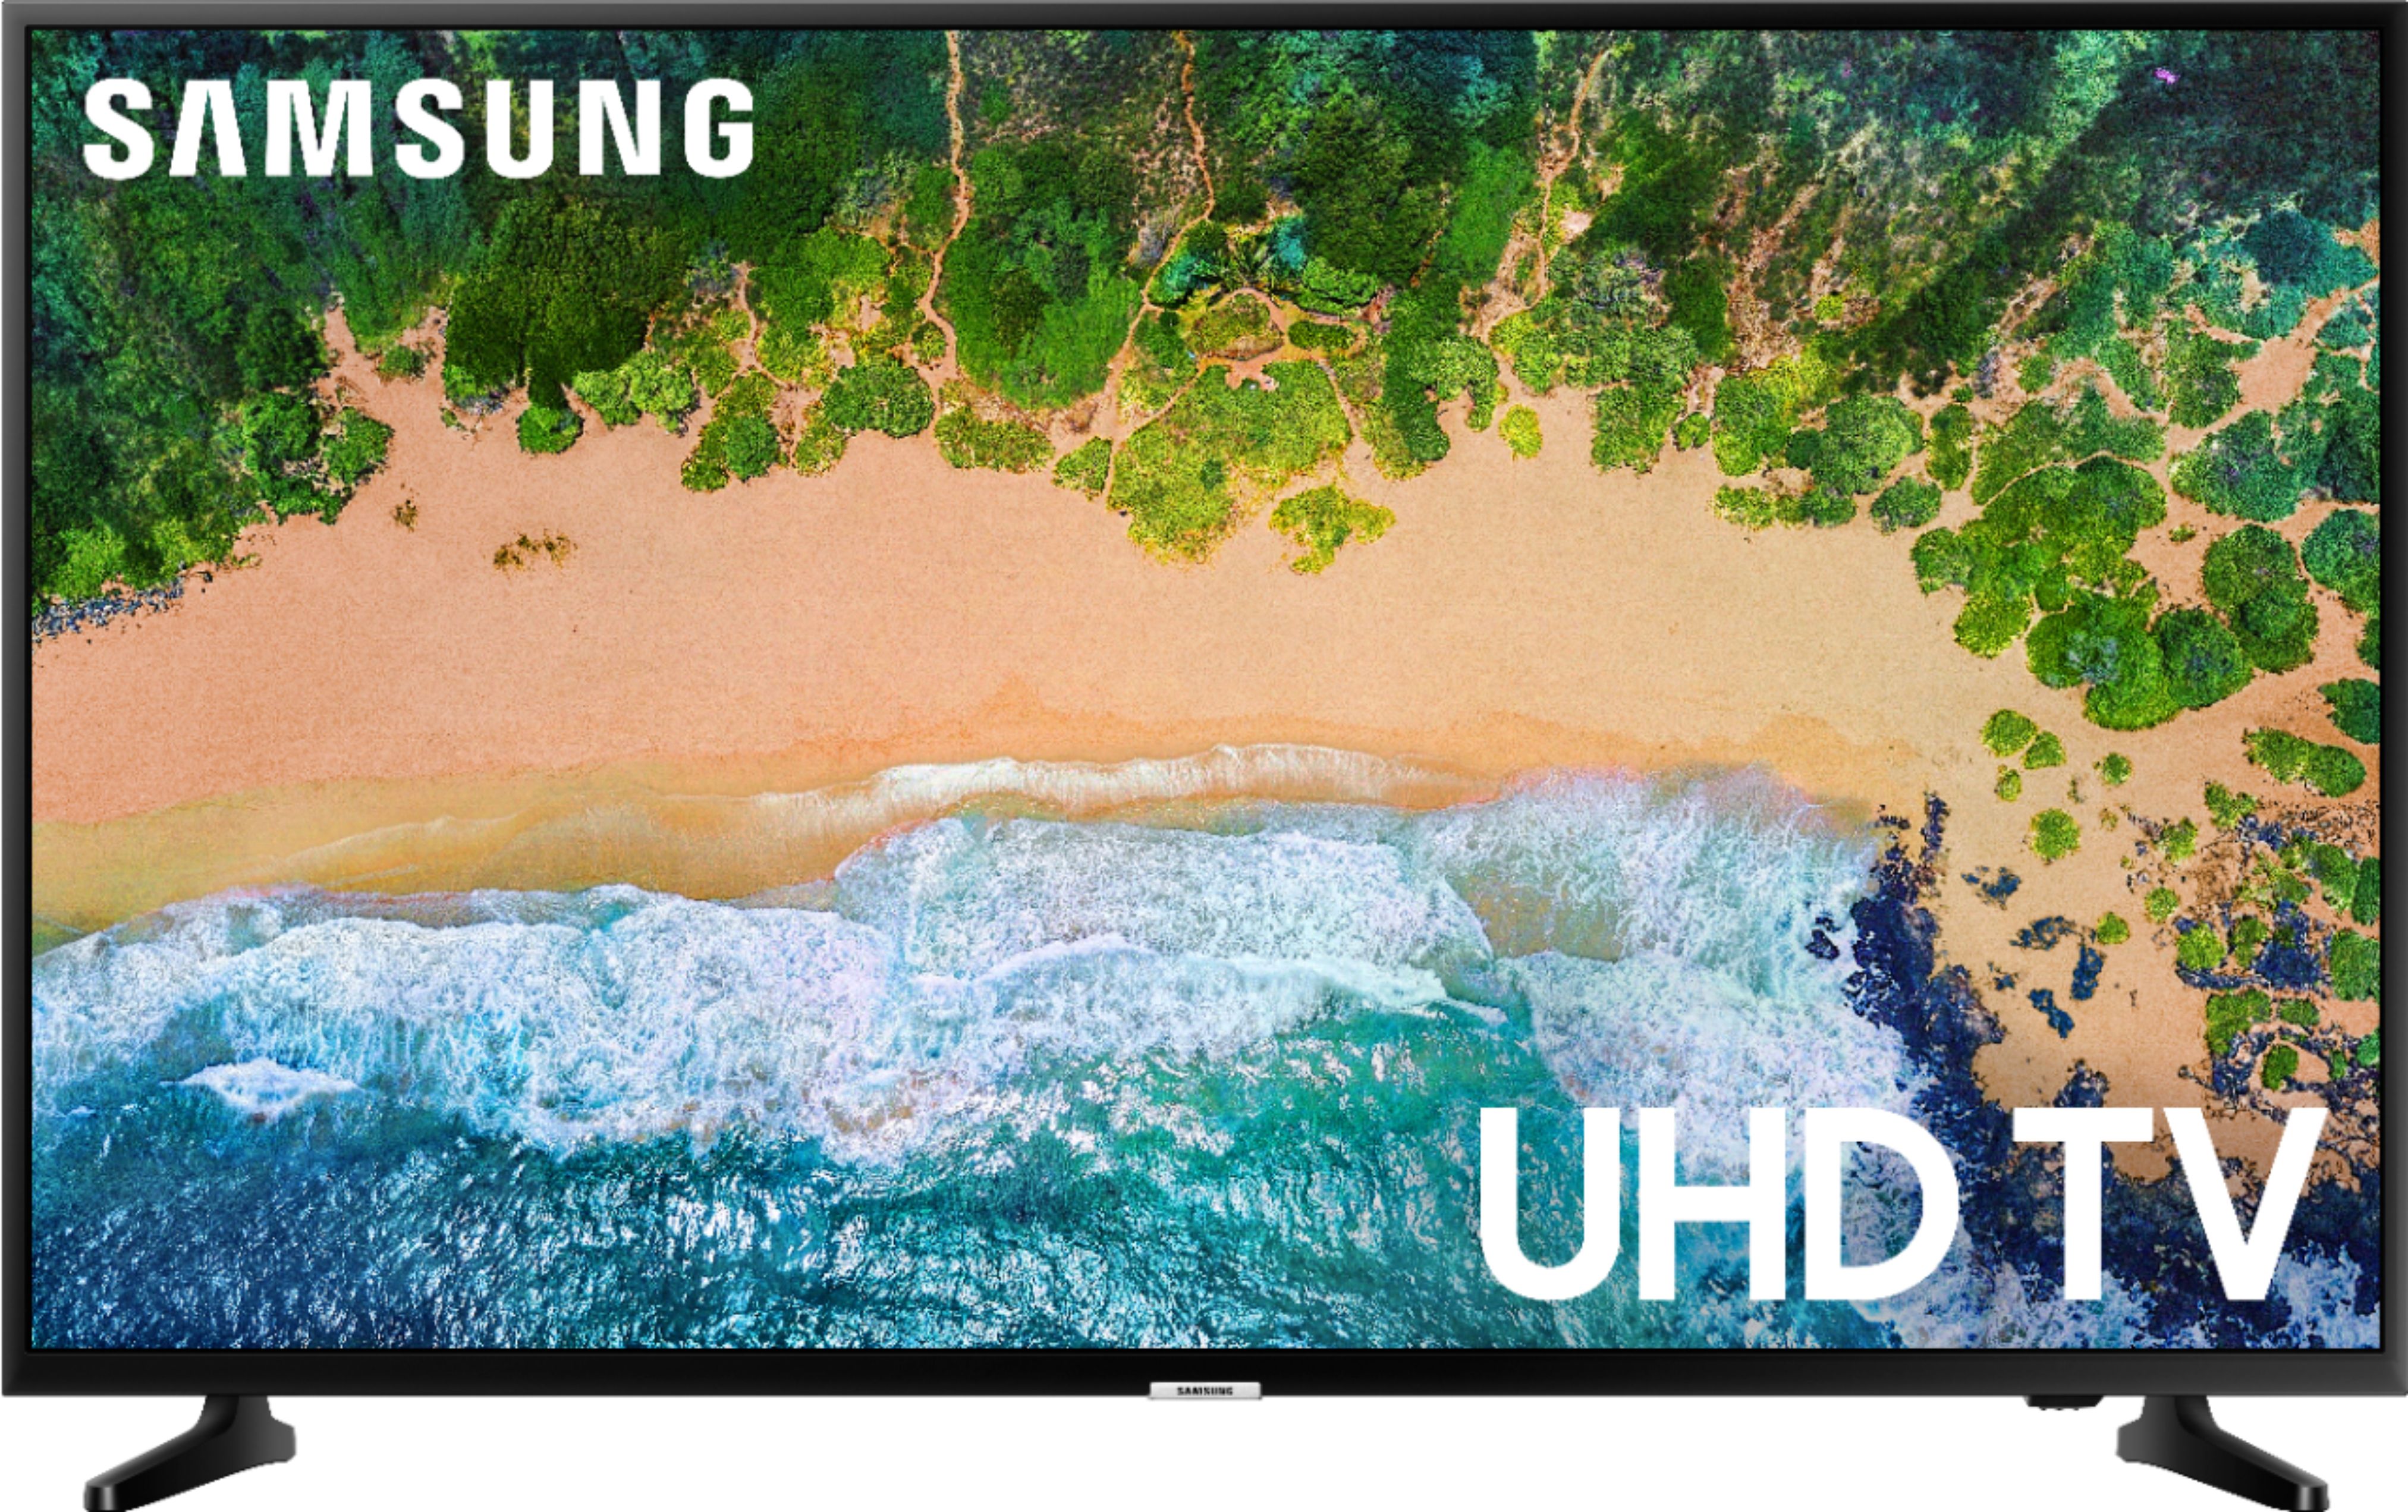 Samsung Tv Turns On By Itself 2018